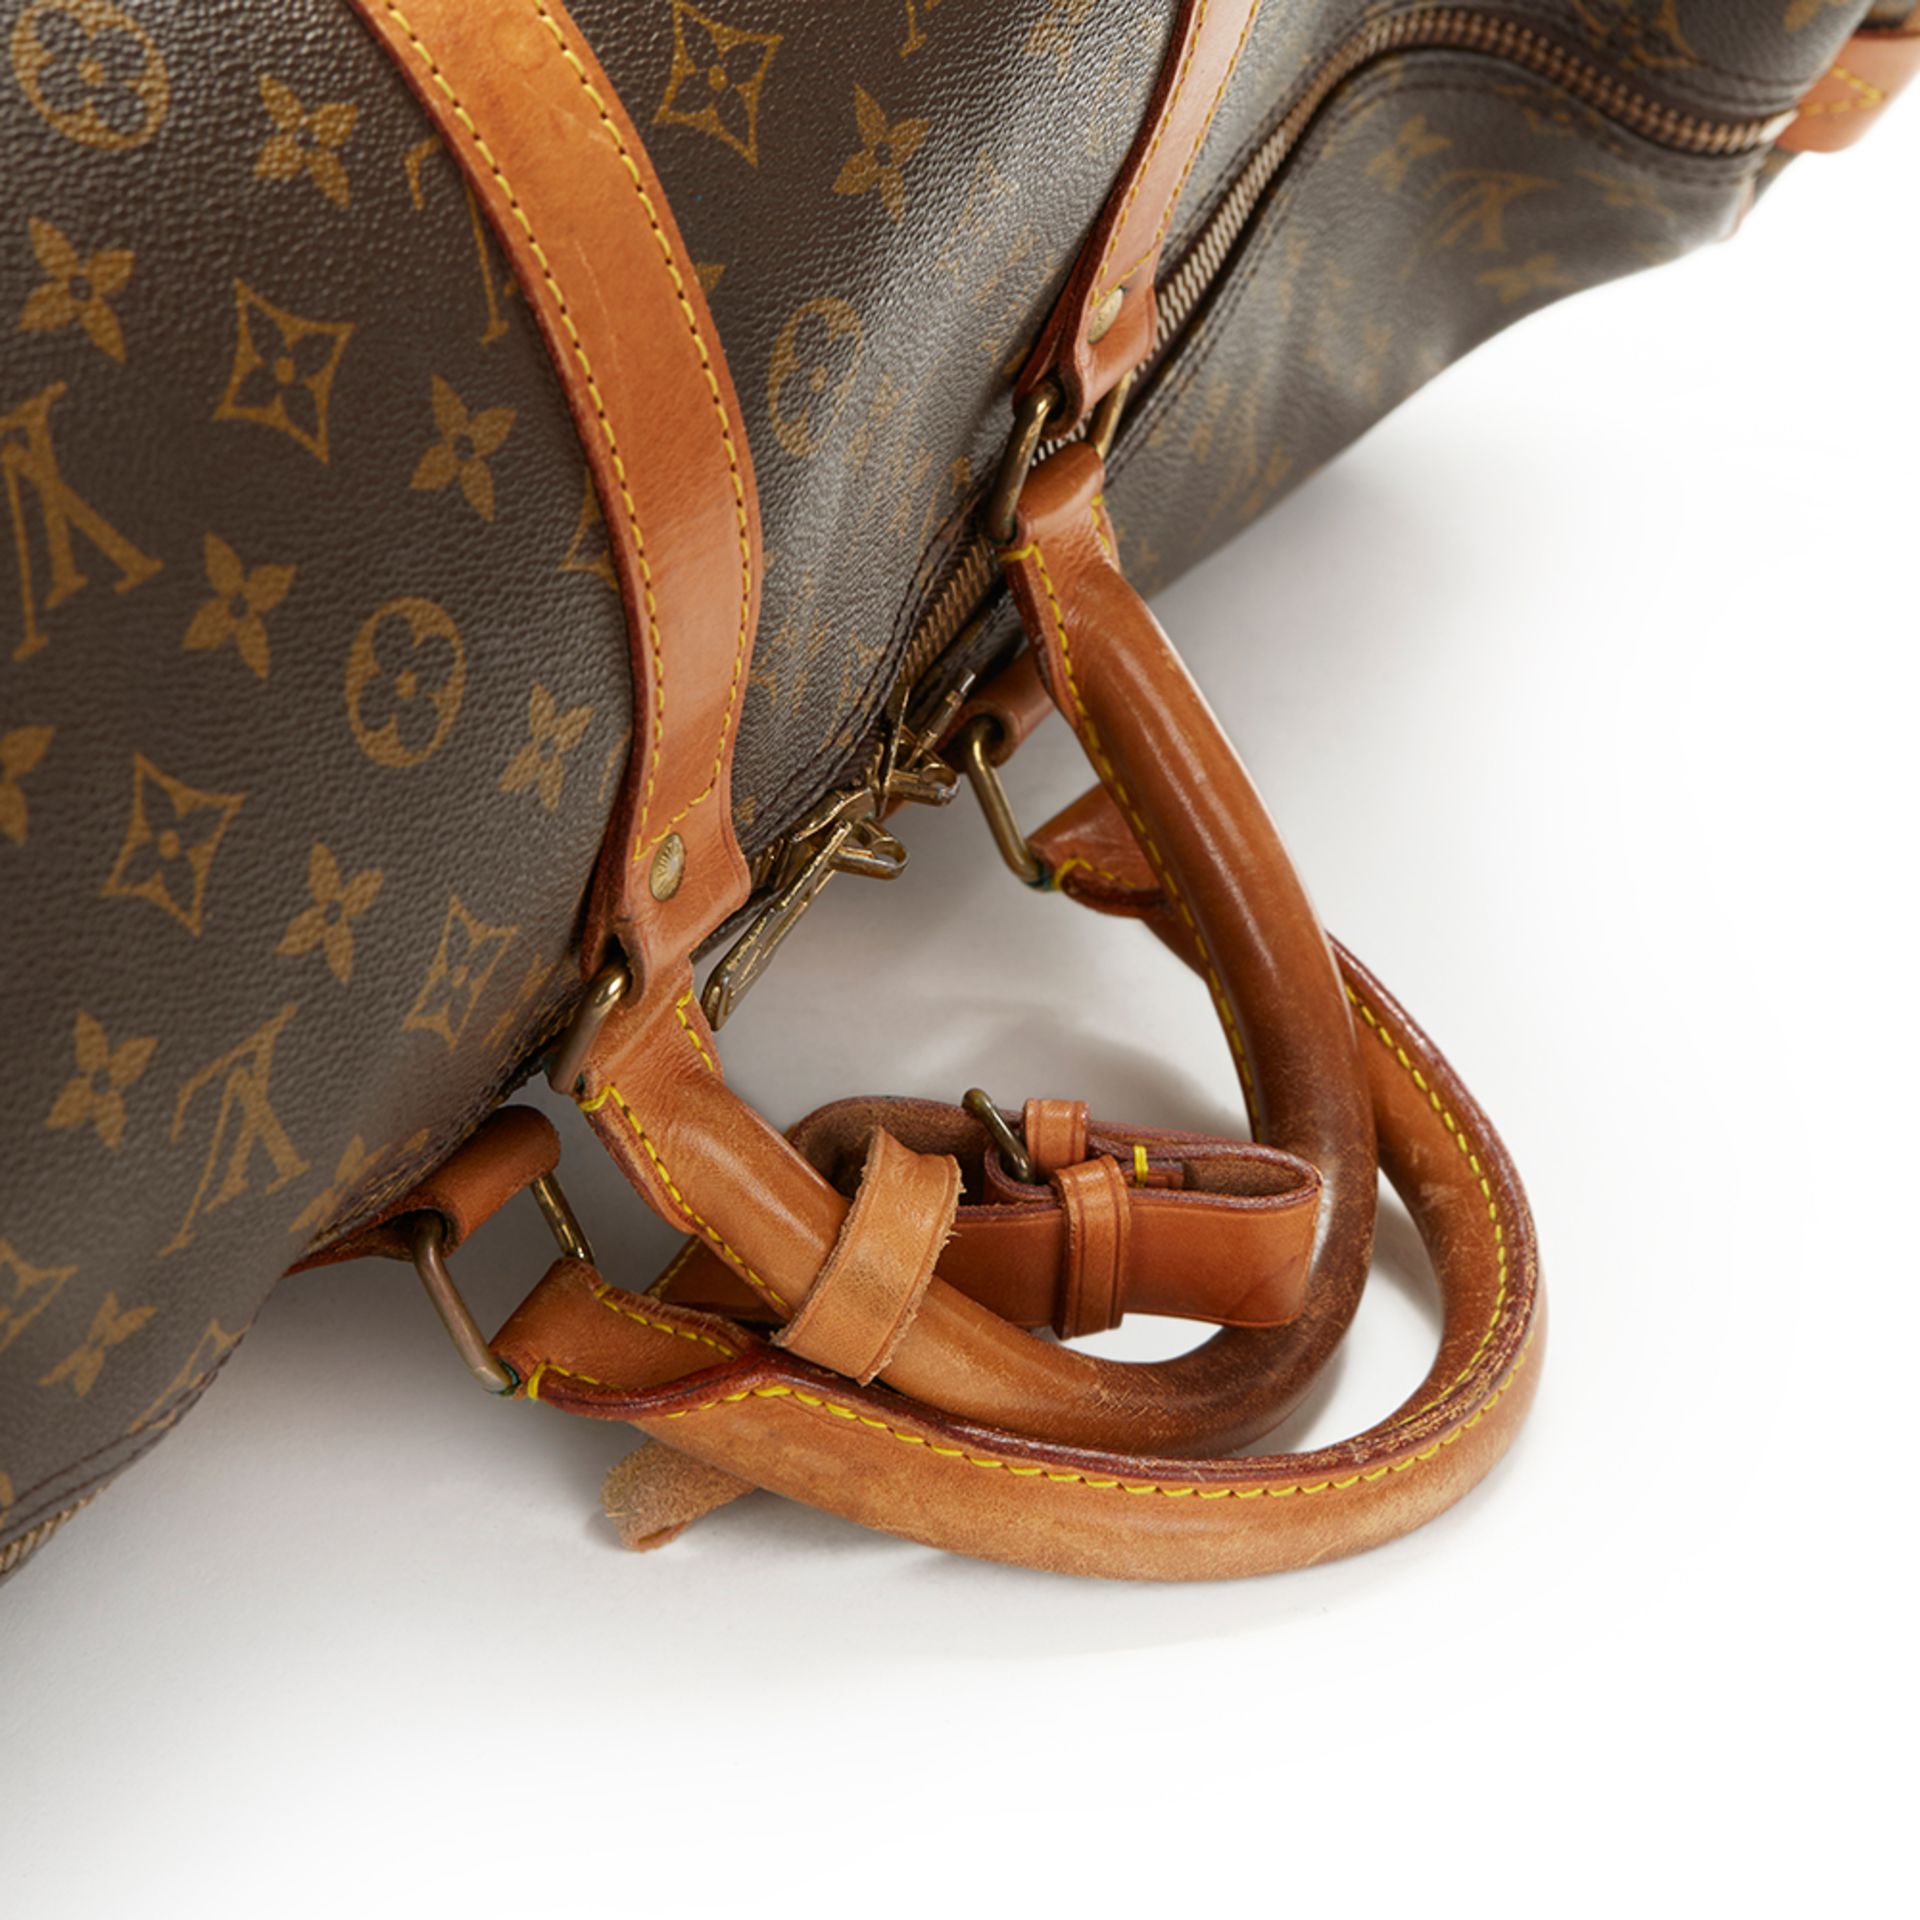 Louis Vuitton Keepall 55 - Image 3 of 12